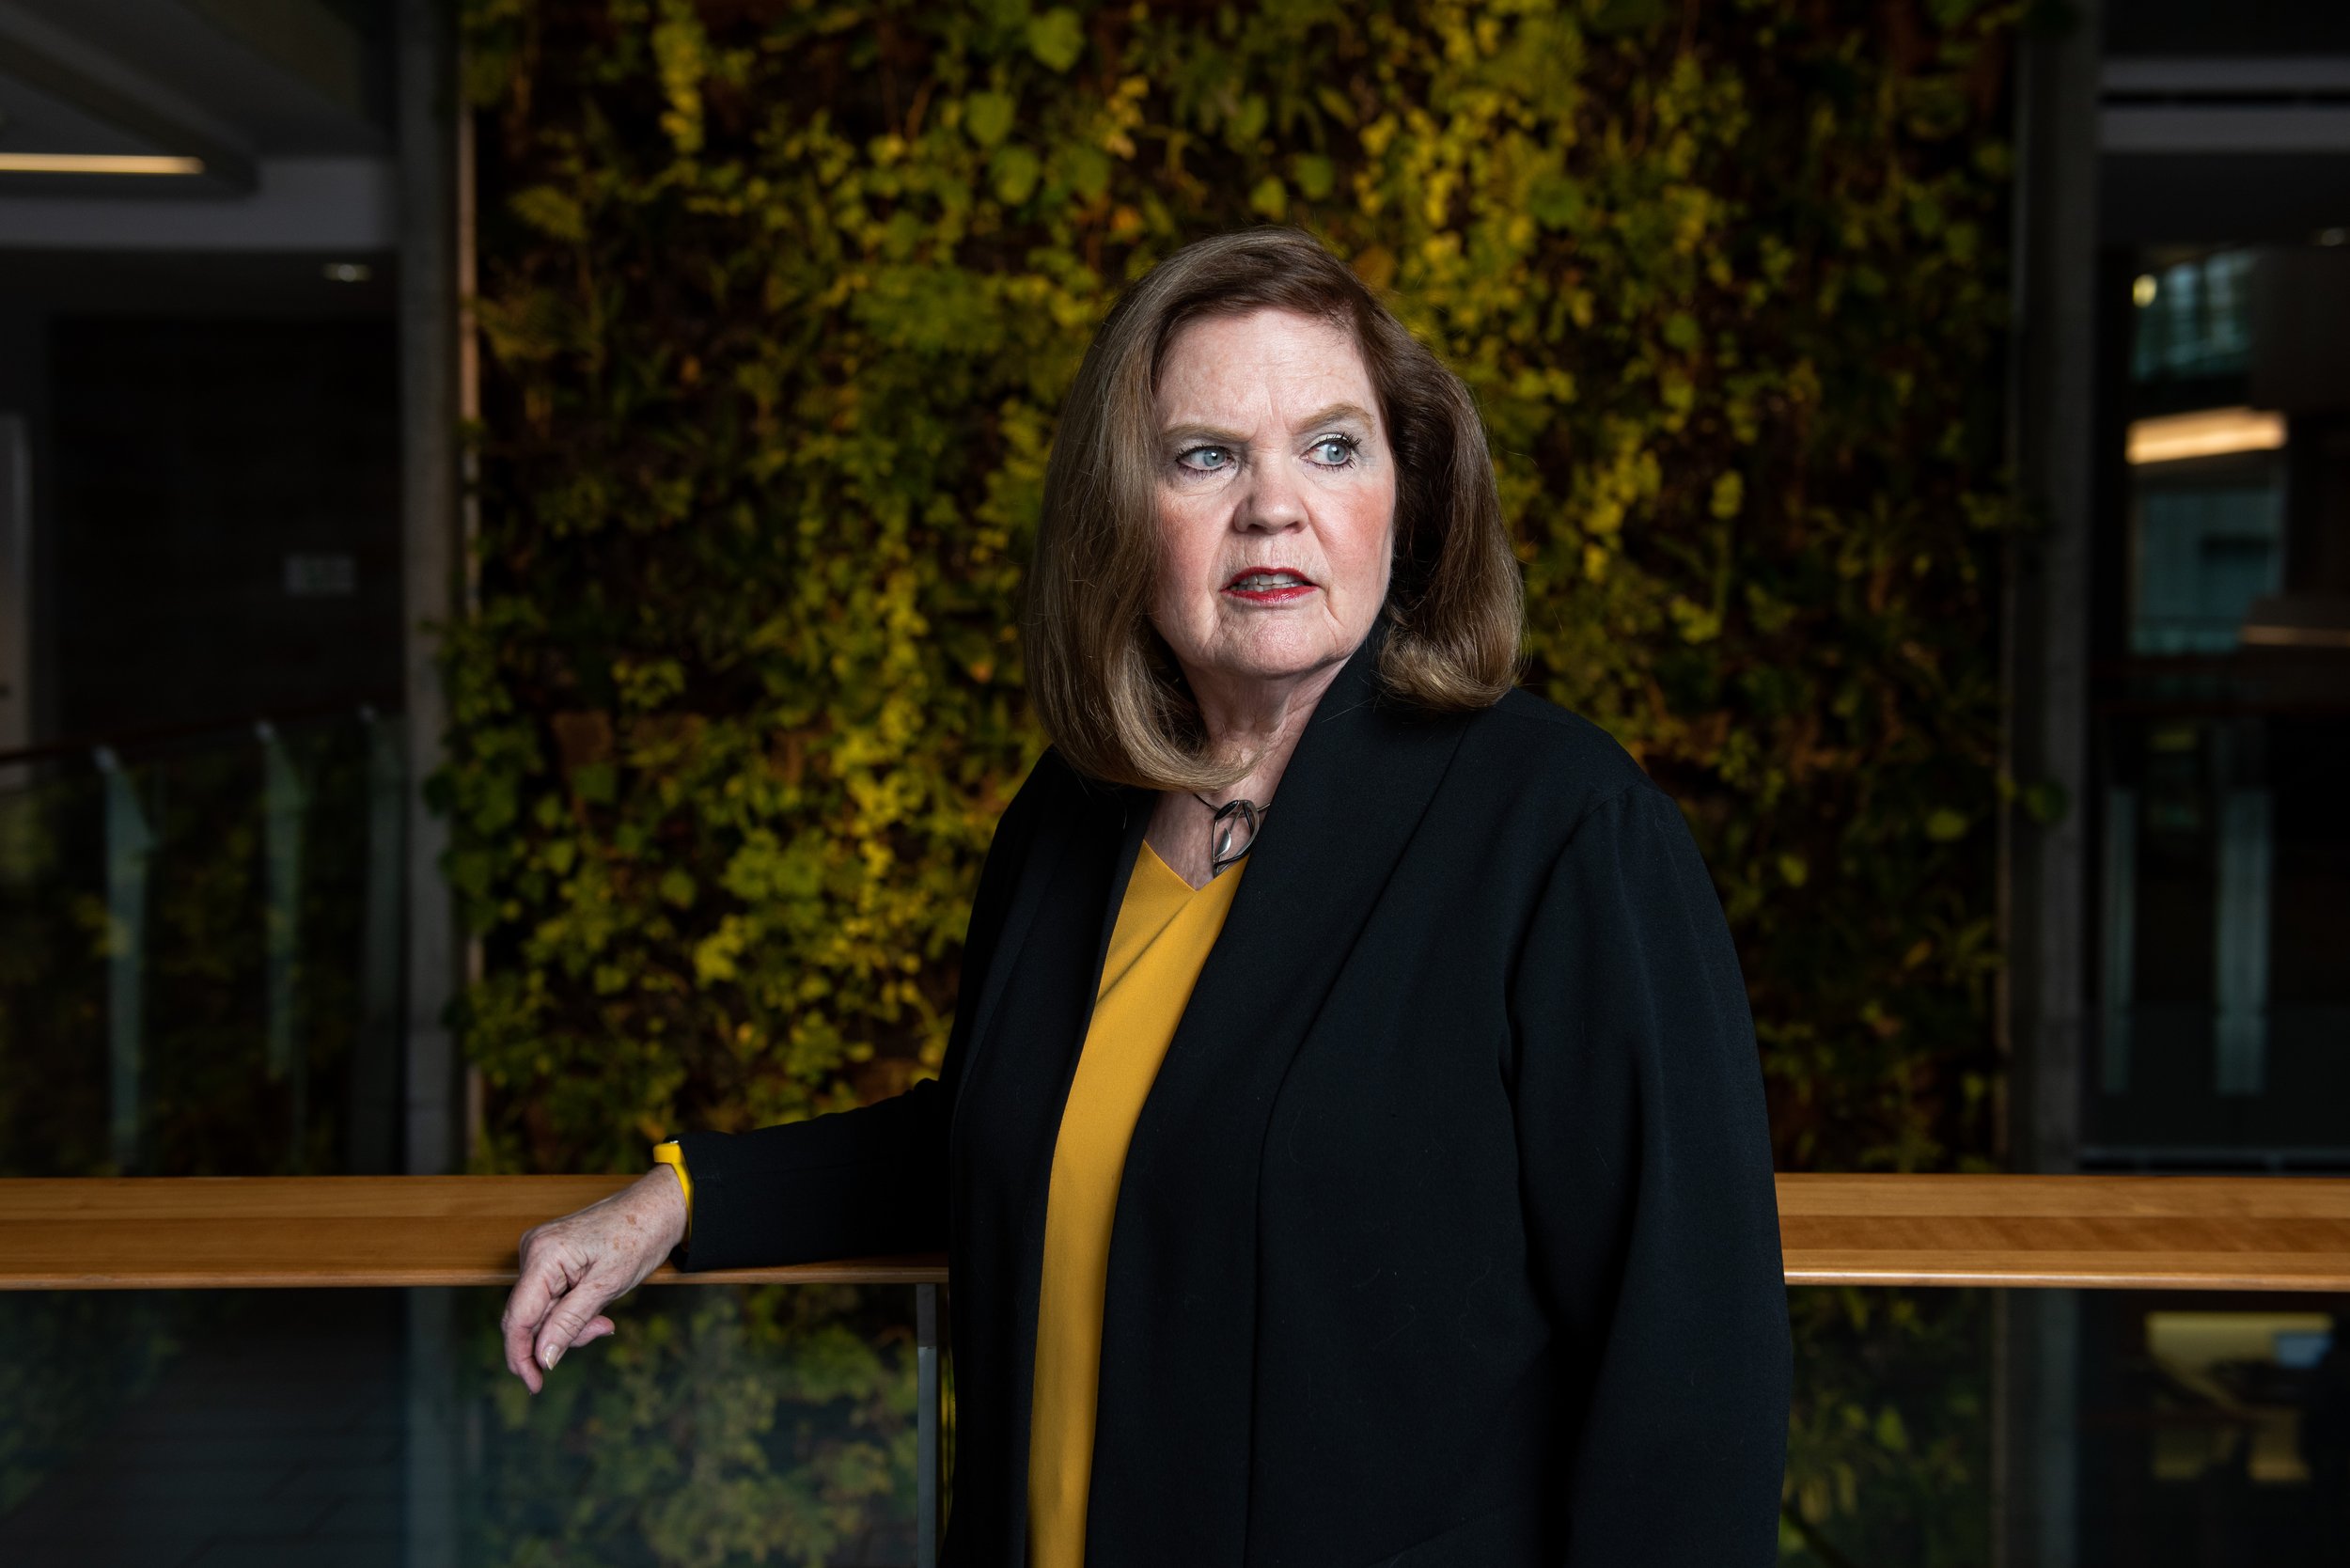  Margaret McCuaig-Johnston, former executive vice-president of NSERC and current senior fellow at the Institute for Science, Society and Policy at the University of Ottawa, is seen in a portrait at the University of Ottawa campus in Ottawa, on Sunday